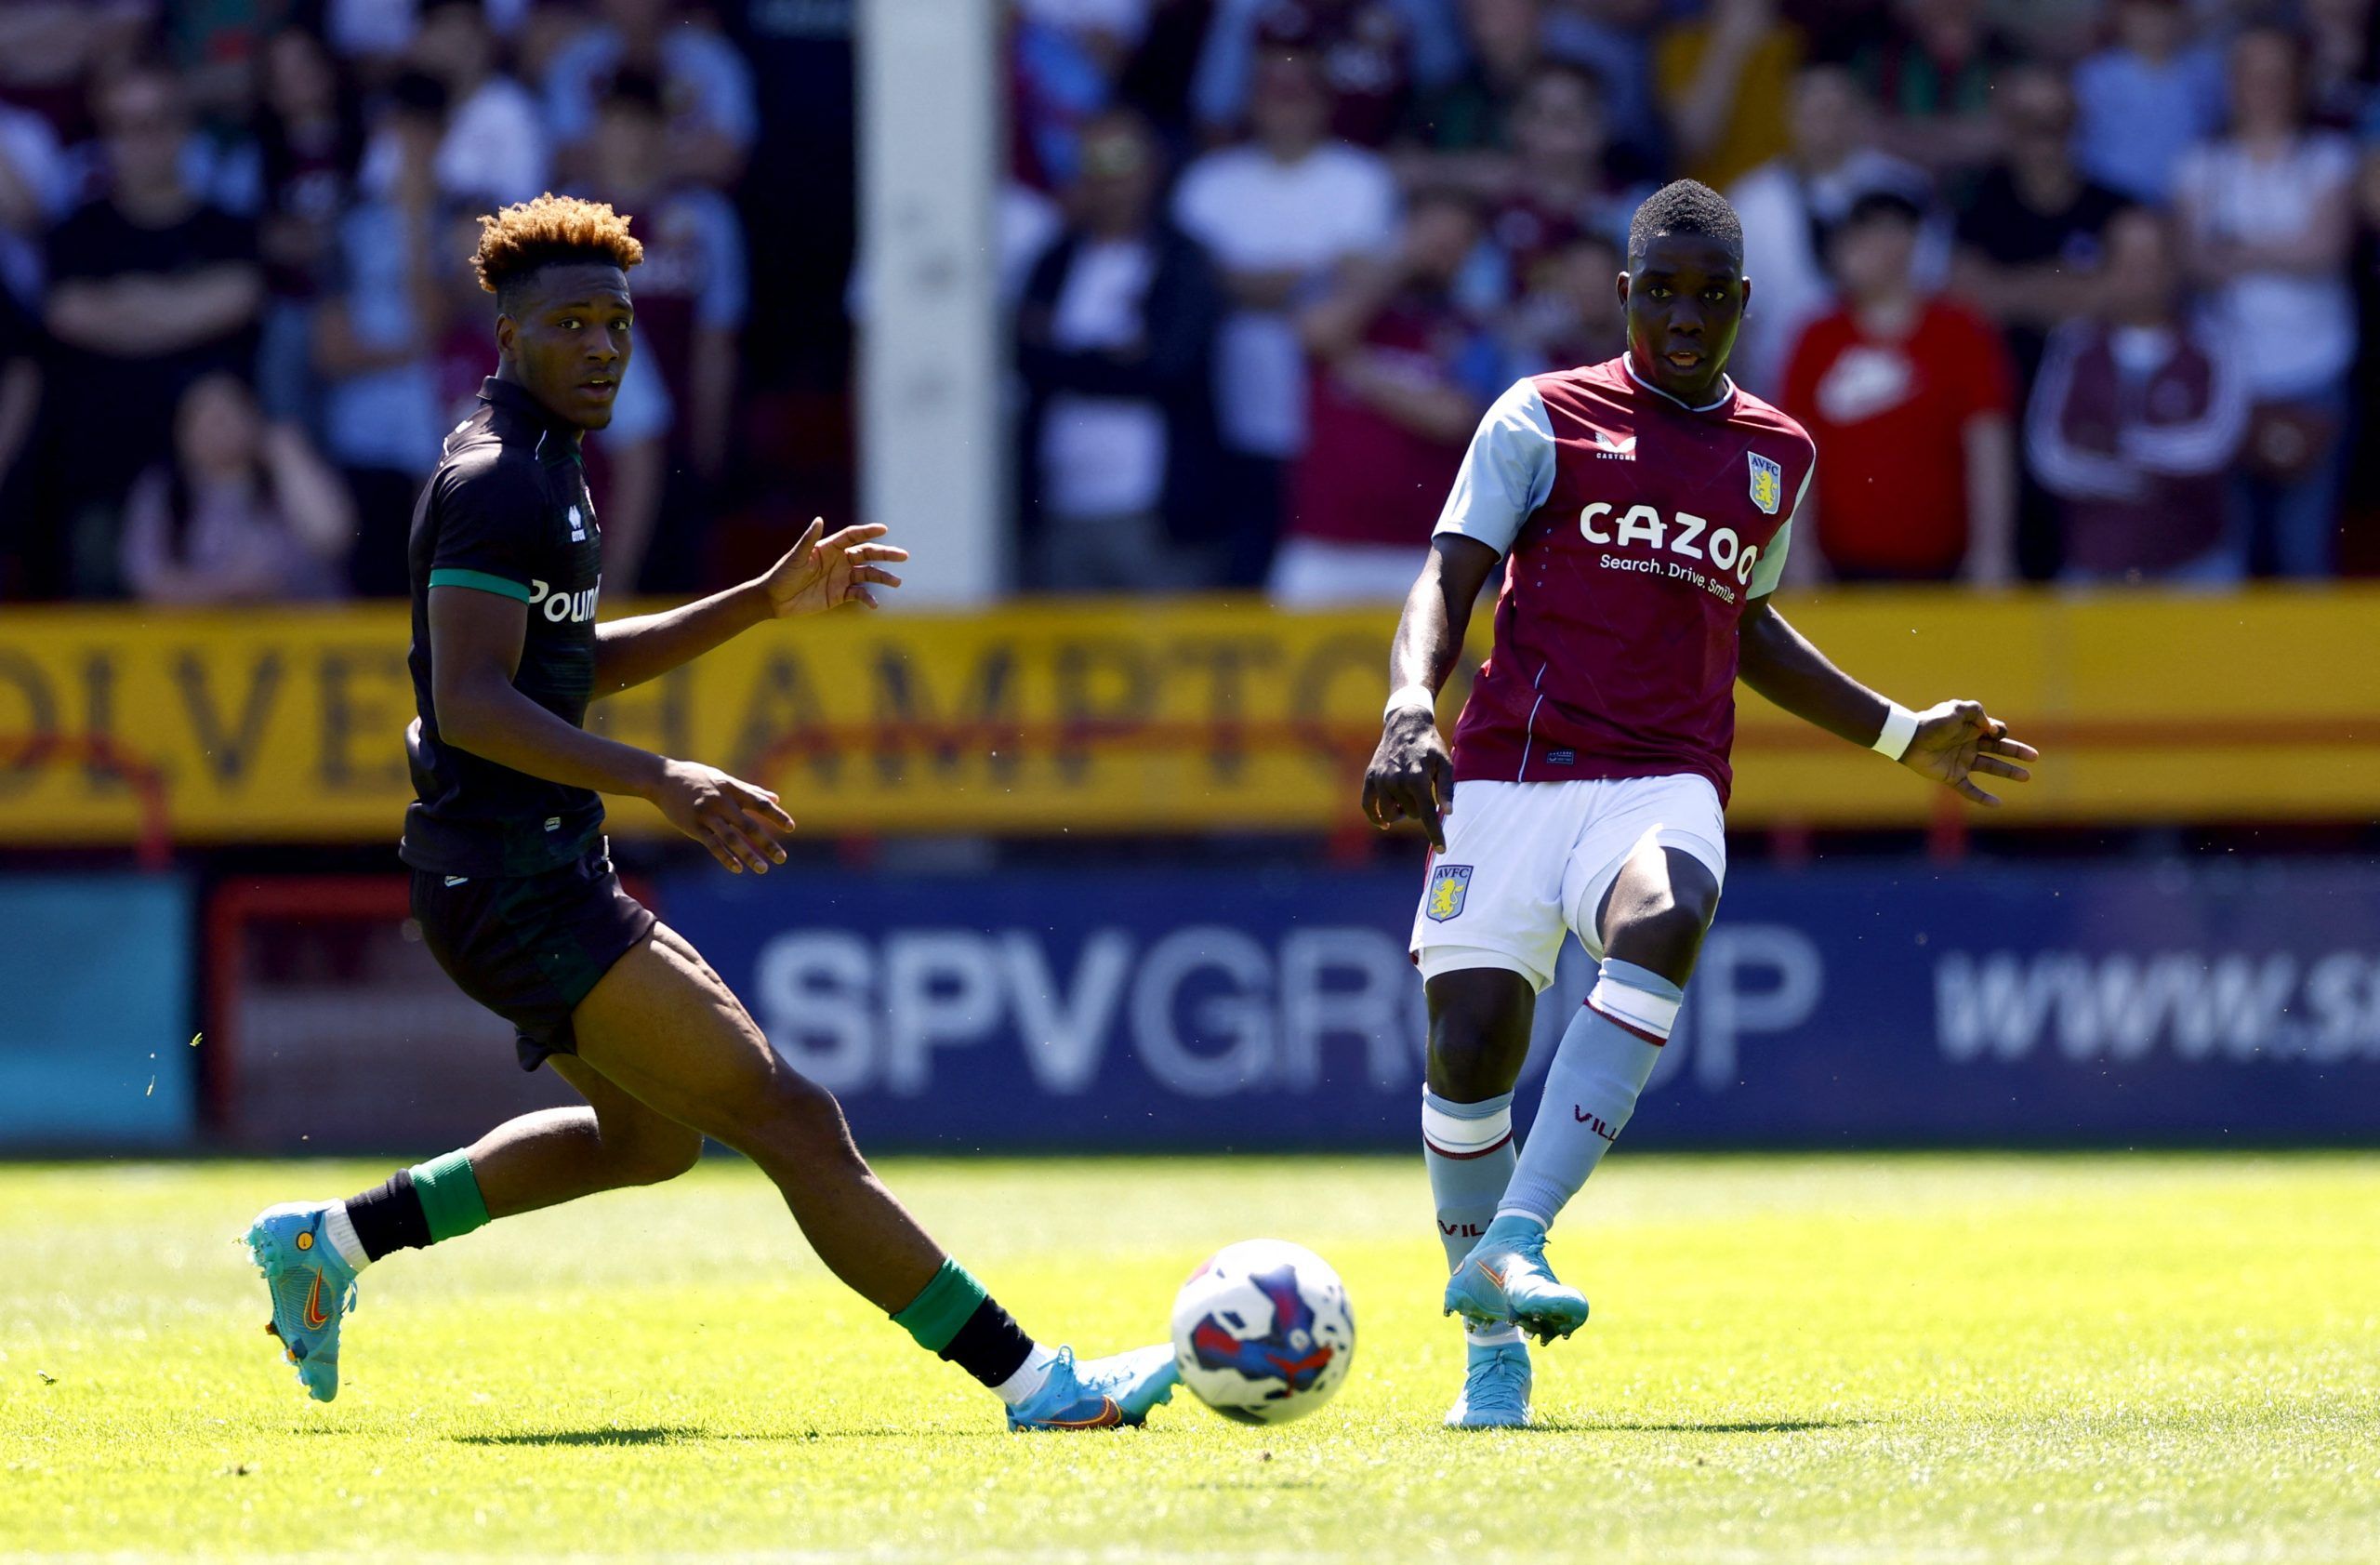 Soccer Football - Pre Season Friendly - Walsall v Aston Villa - Bescot Stadium, Walsall, Britain - July 9, 2022 Walsall's Timmy Abraham in action with Aston Villa's Marvelous Nakamba Action Images via Reuters/Andrew Boyers